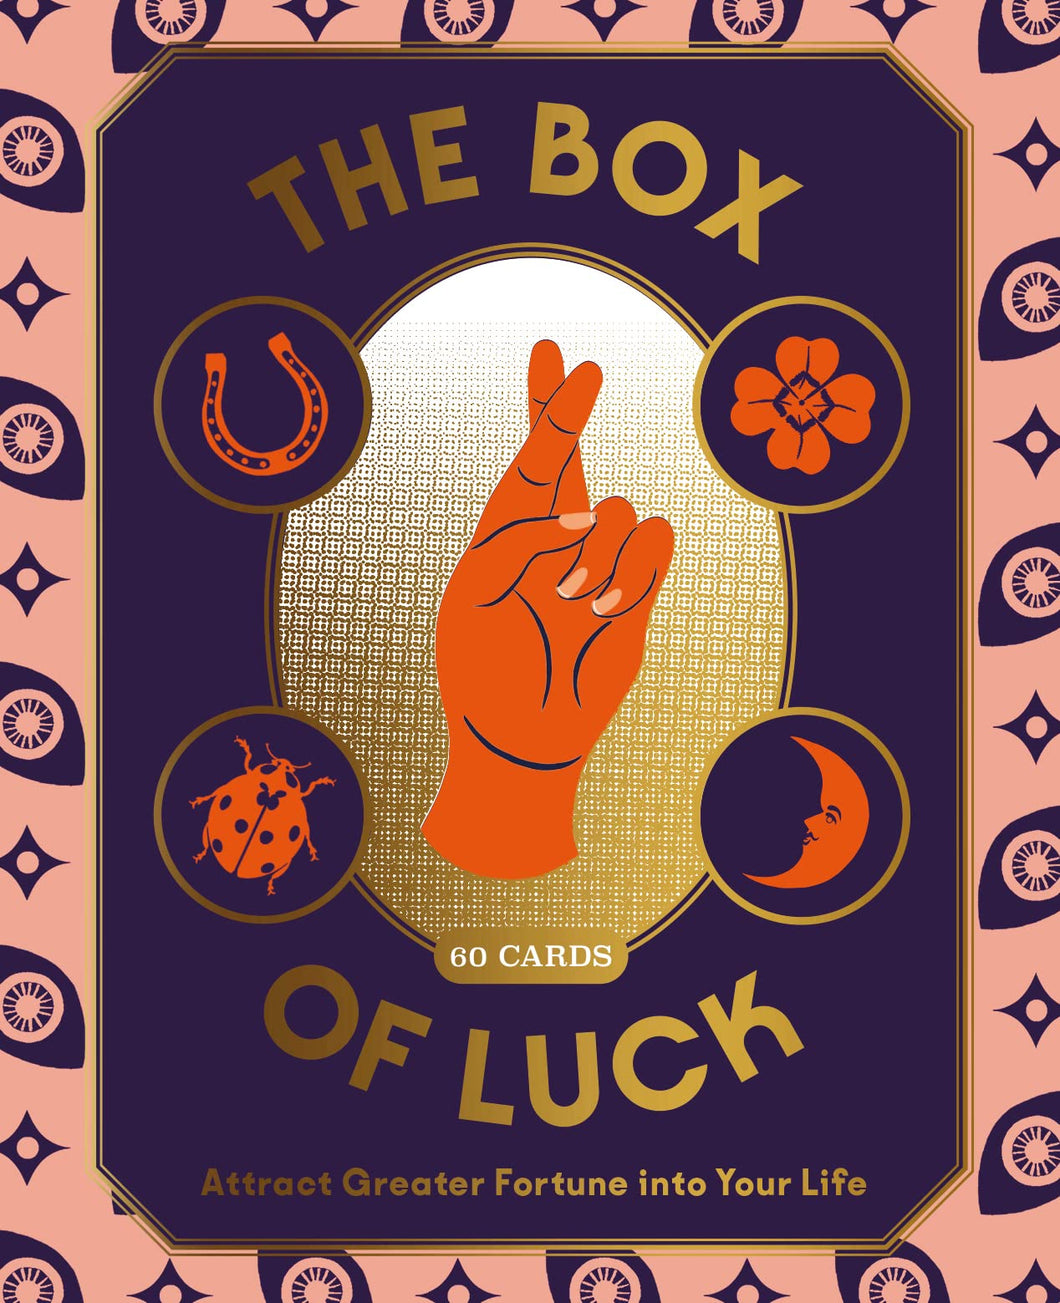 The Box of luck